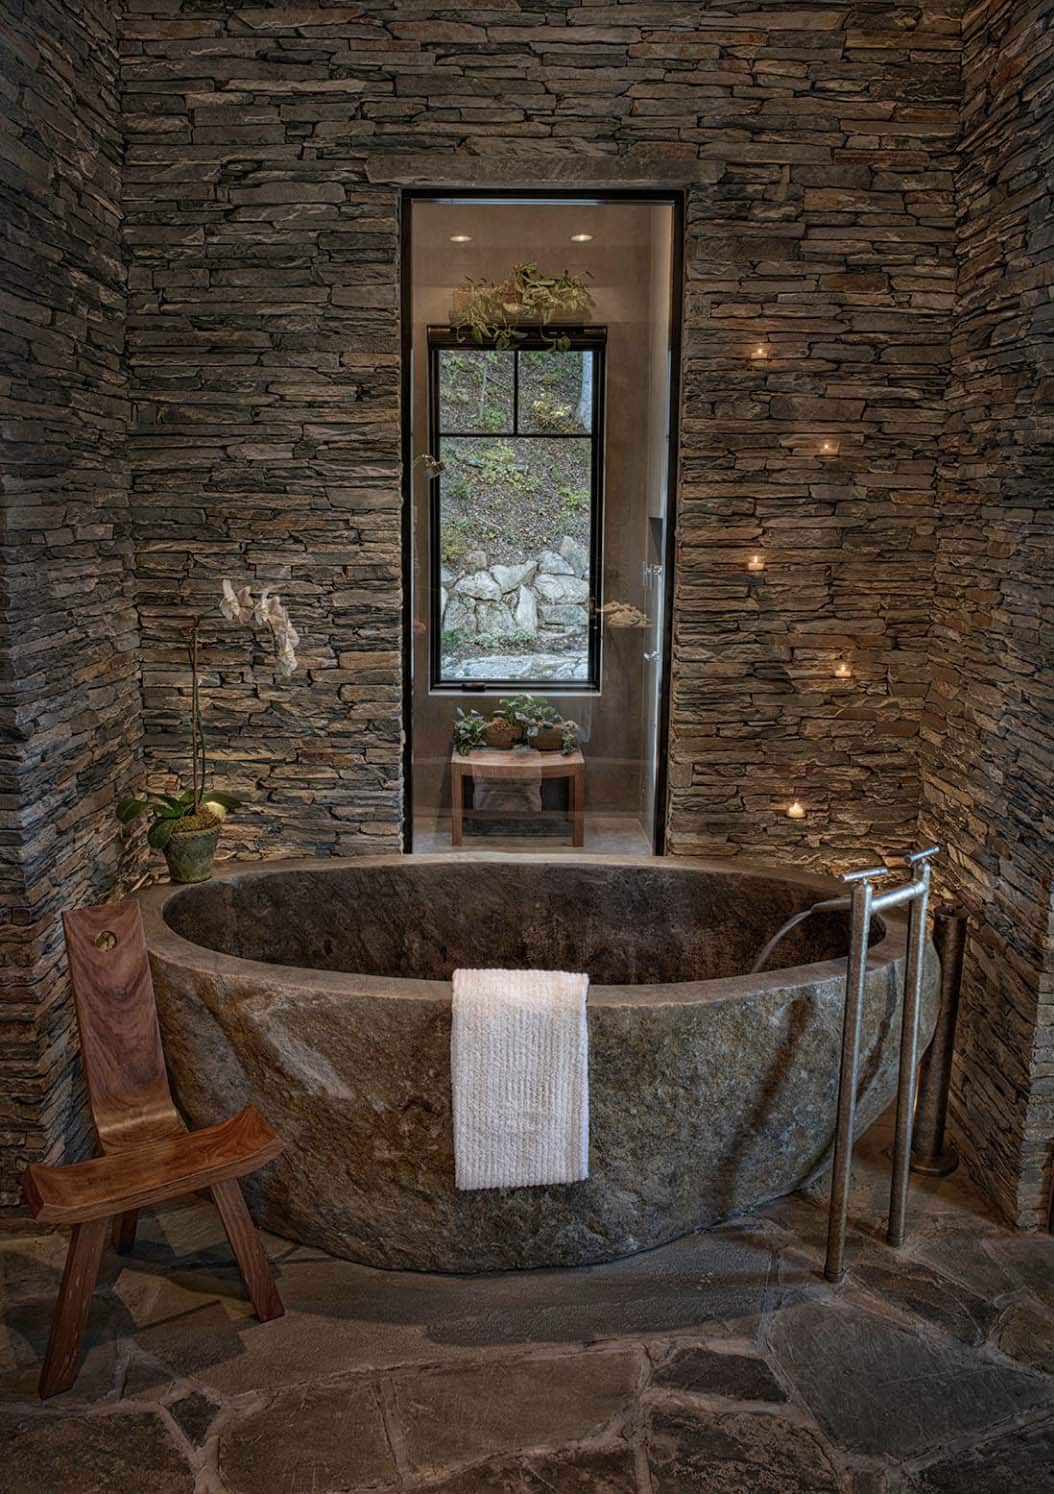 romantic rustic bathroom with a stone tub and stone walls